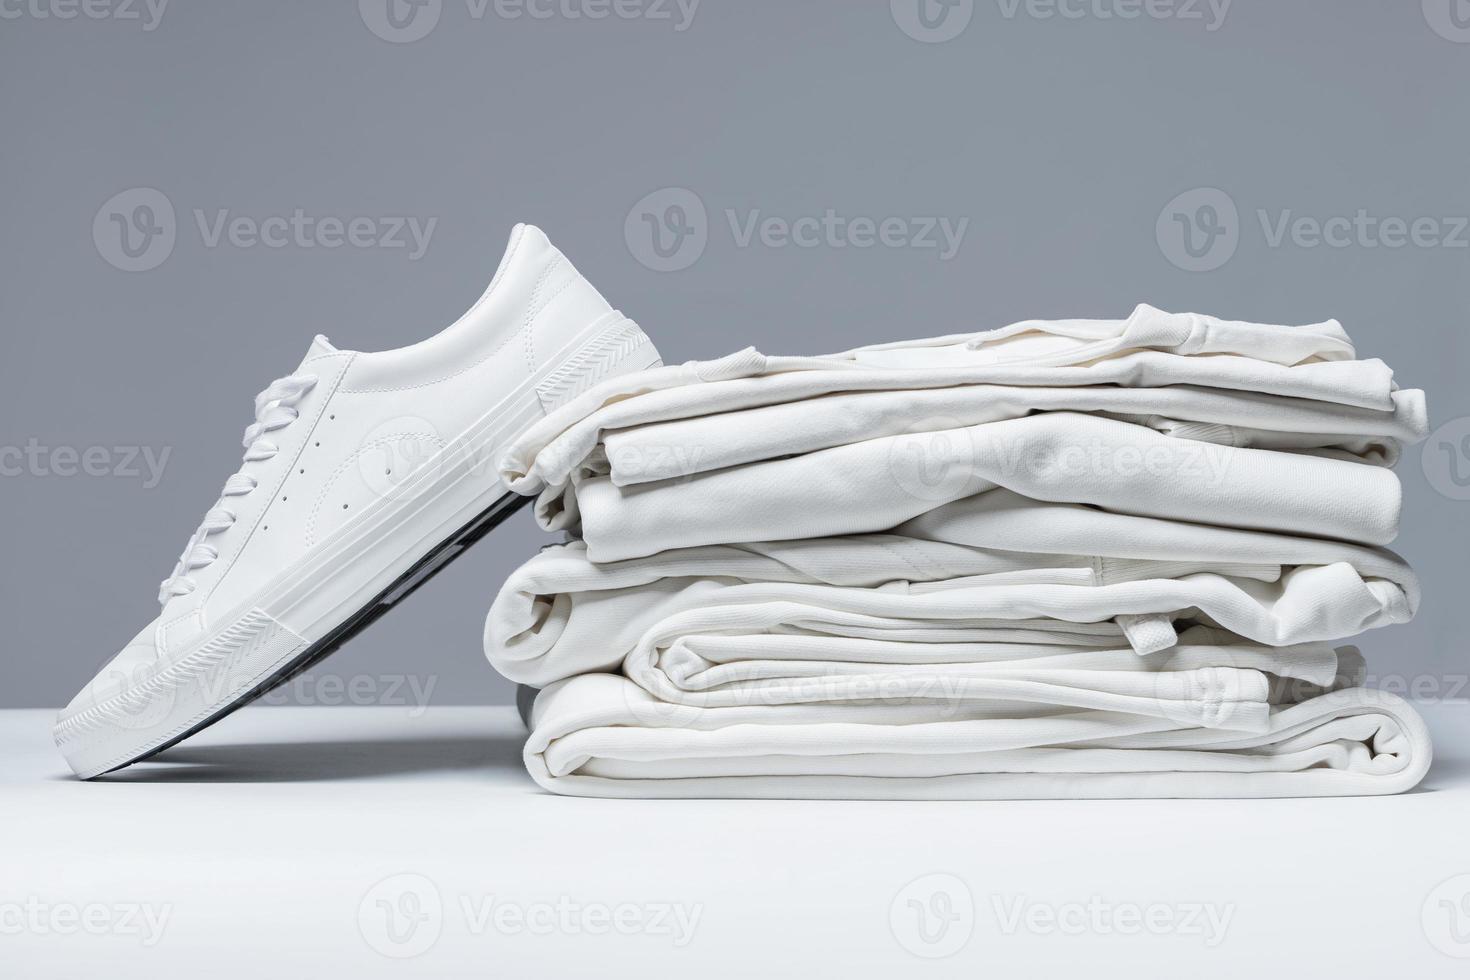 Stack of white clothes and stylish trainers photo